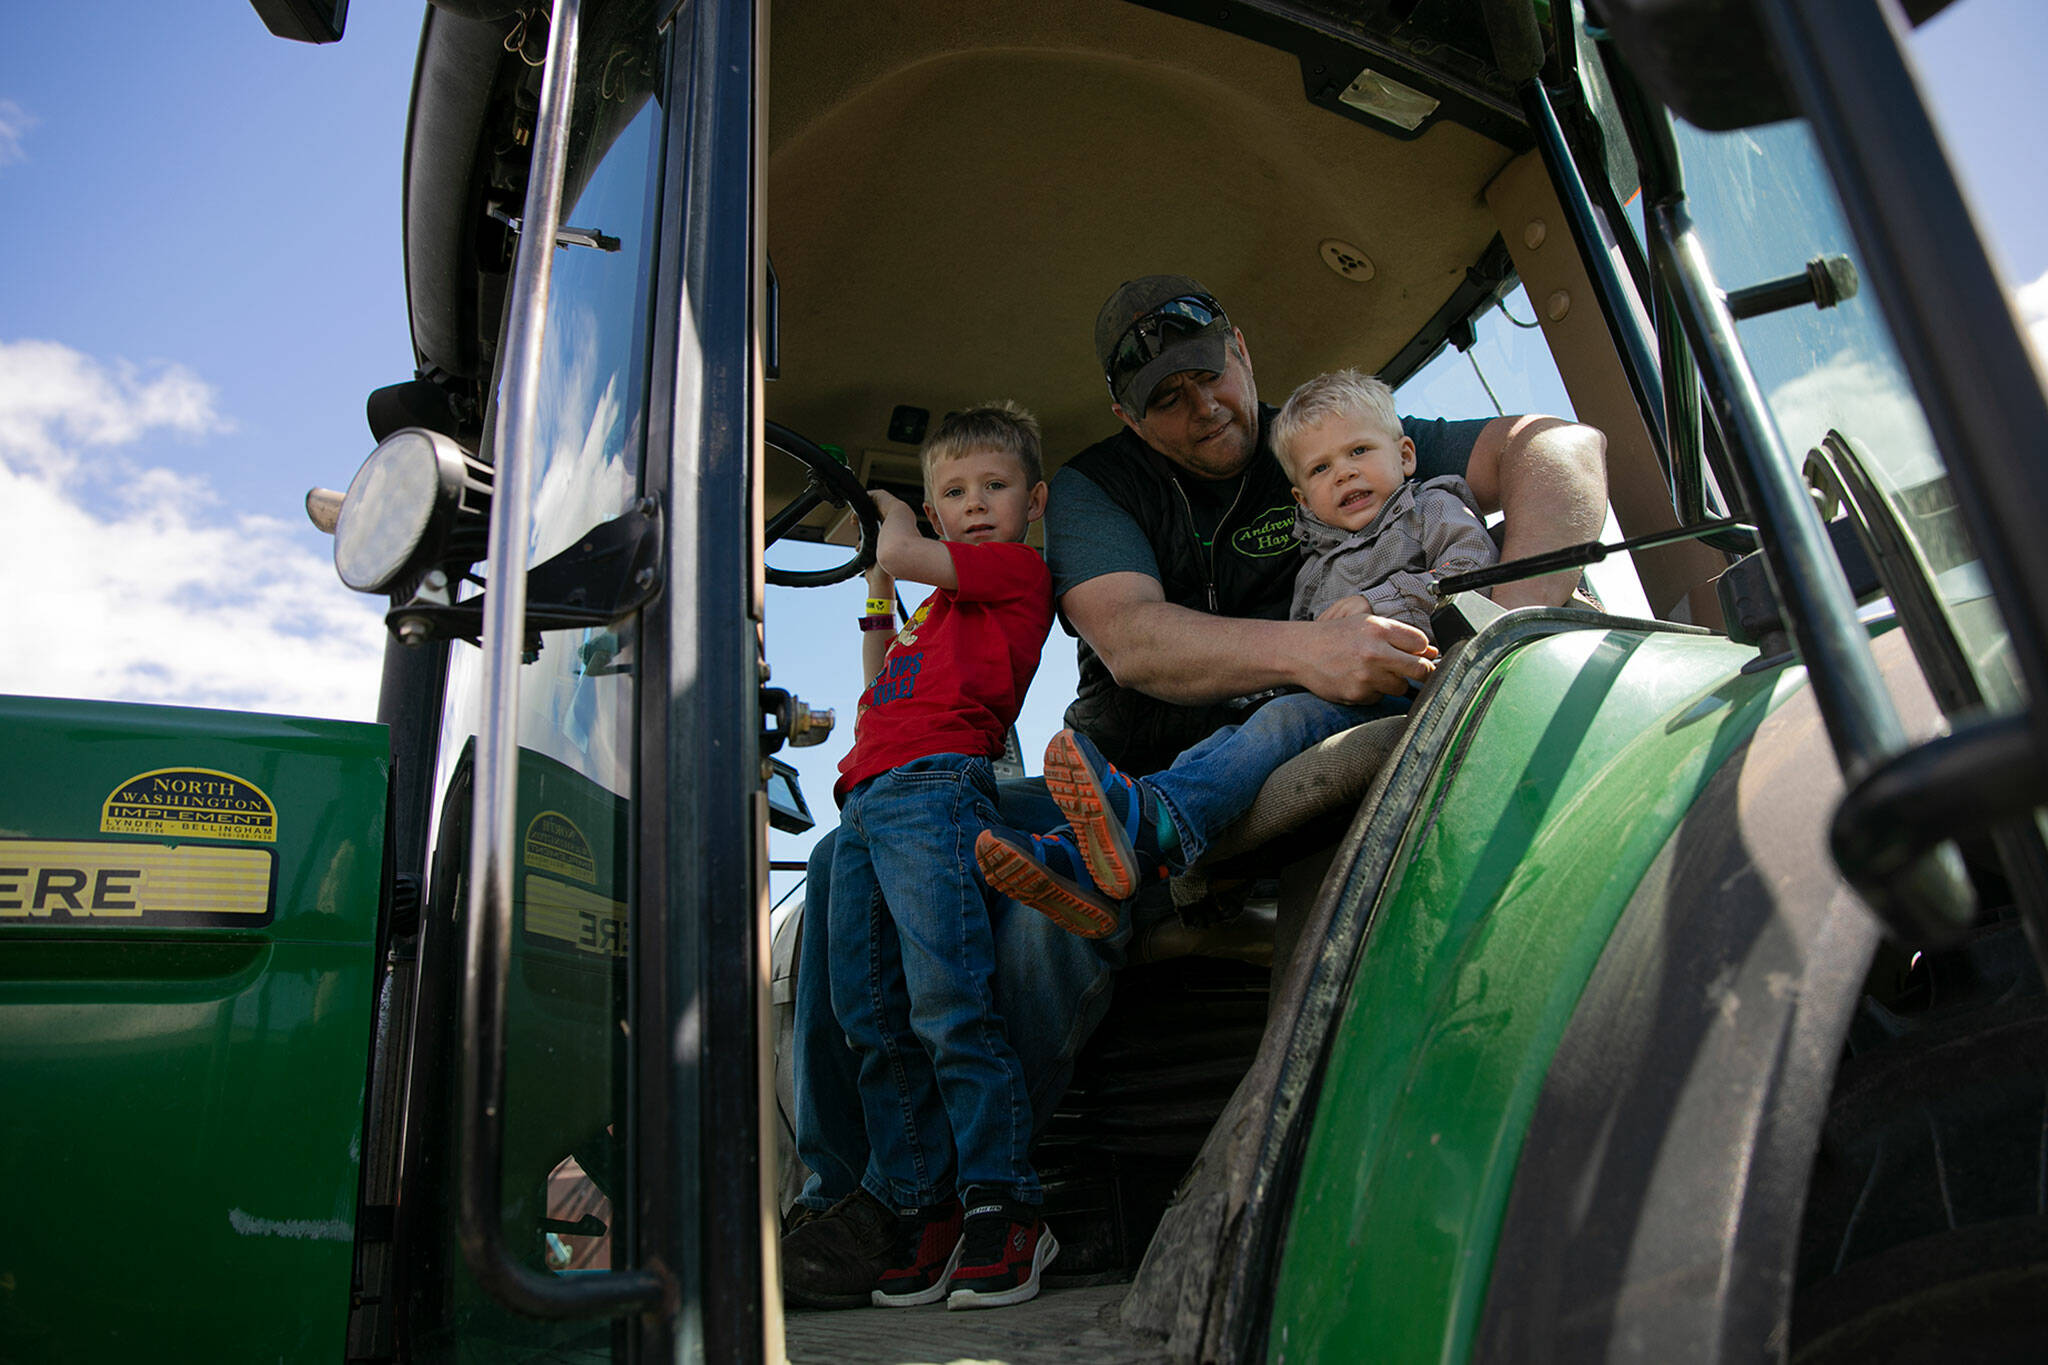 Andrew Albert buckles in his sons Thomas, 2 (right), and Reece, 4, before heading out to fertilize a field across town Friday in Arlington. (Ryan Berry / The Herald)